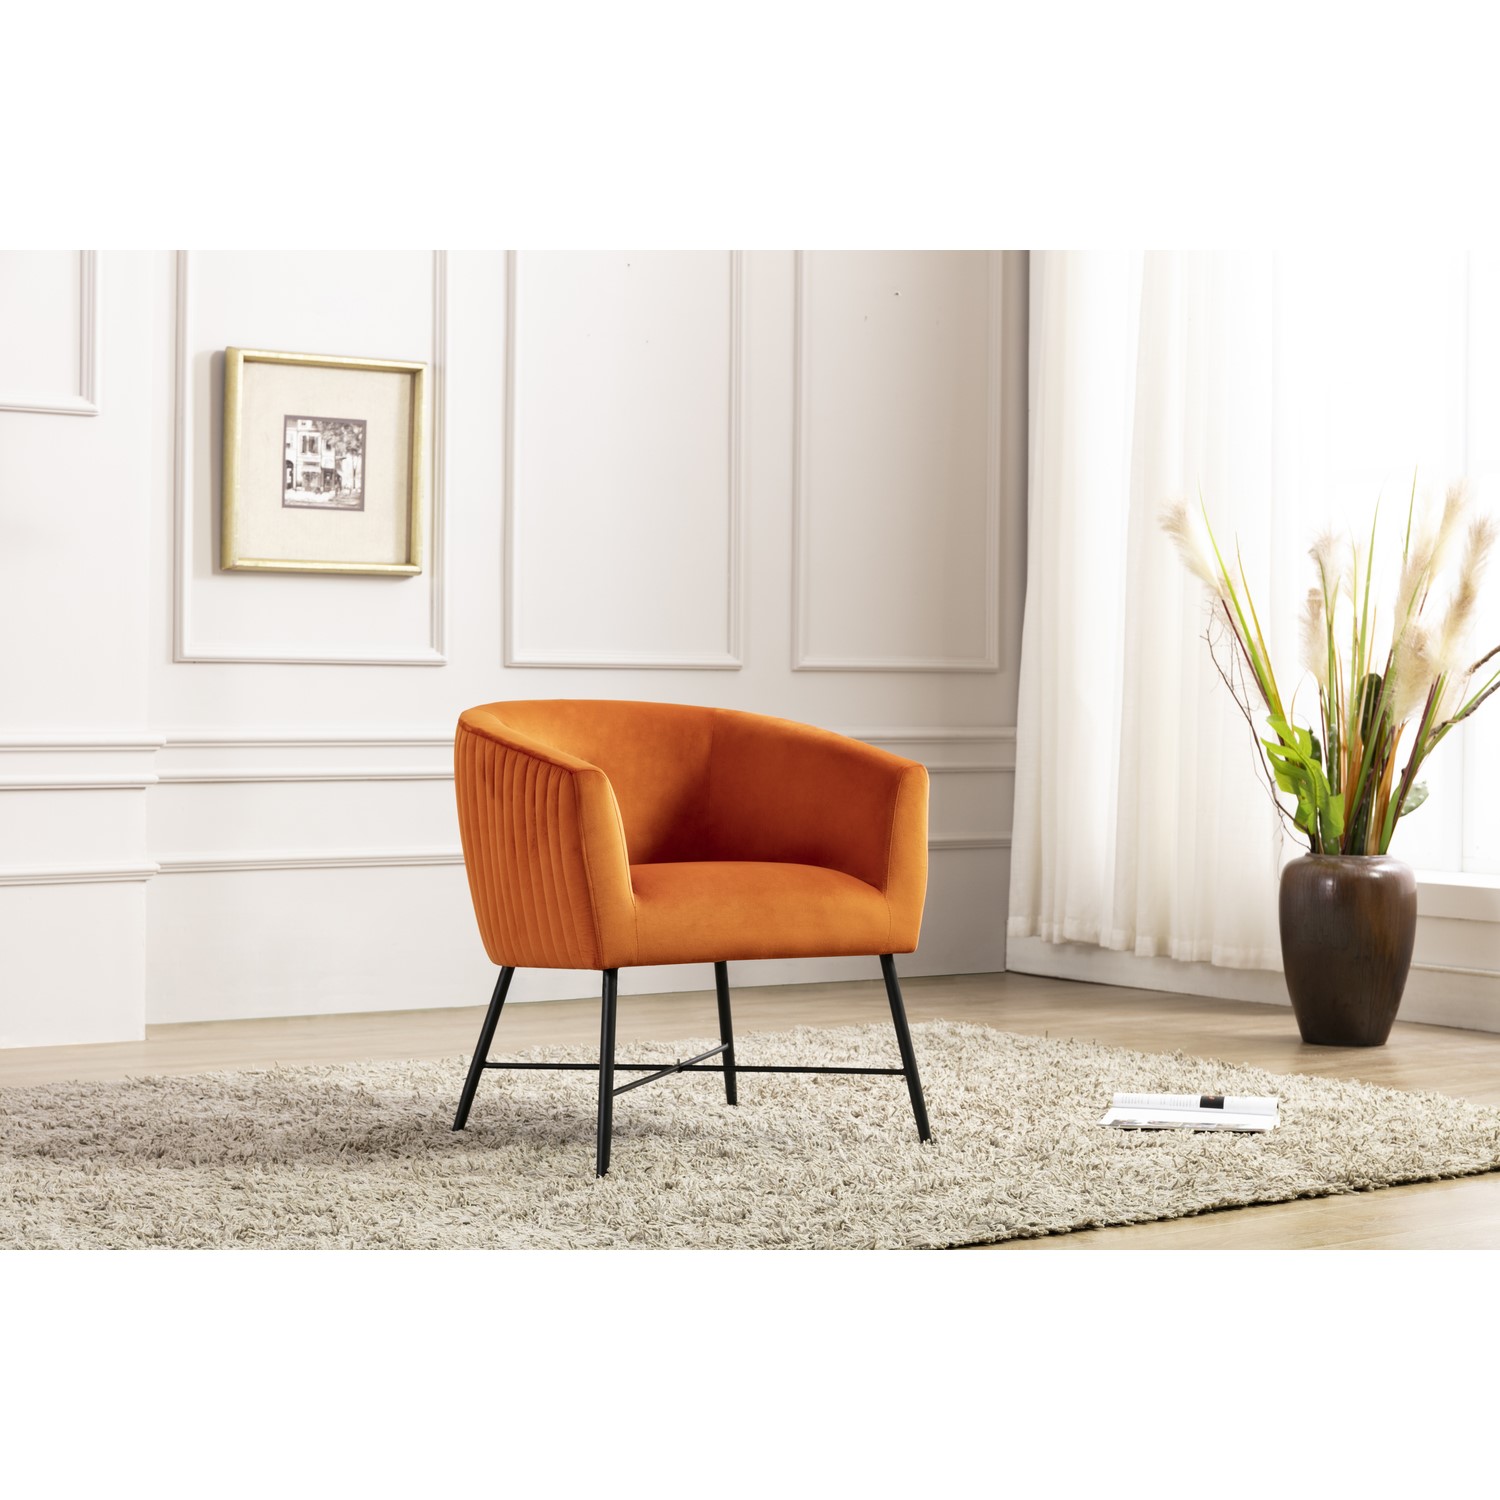 Orange Accent Chairs With Black Legs, Orange Living Room Chair